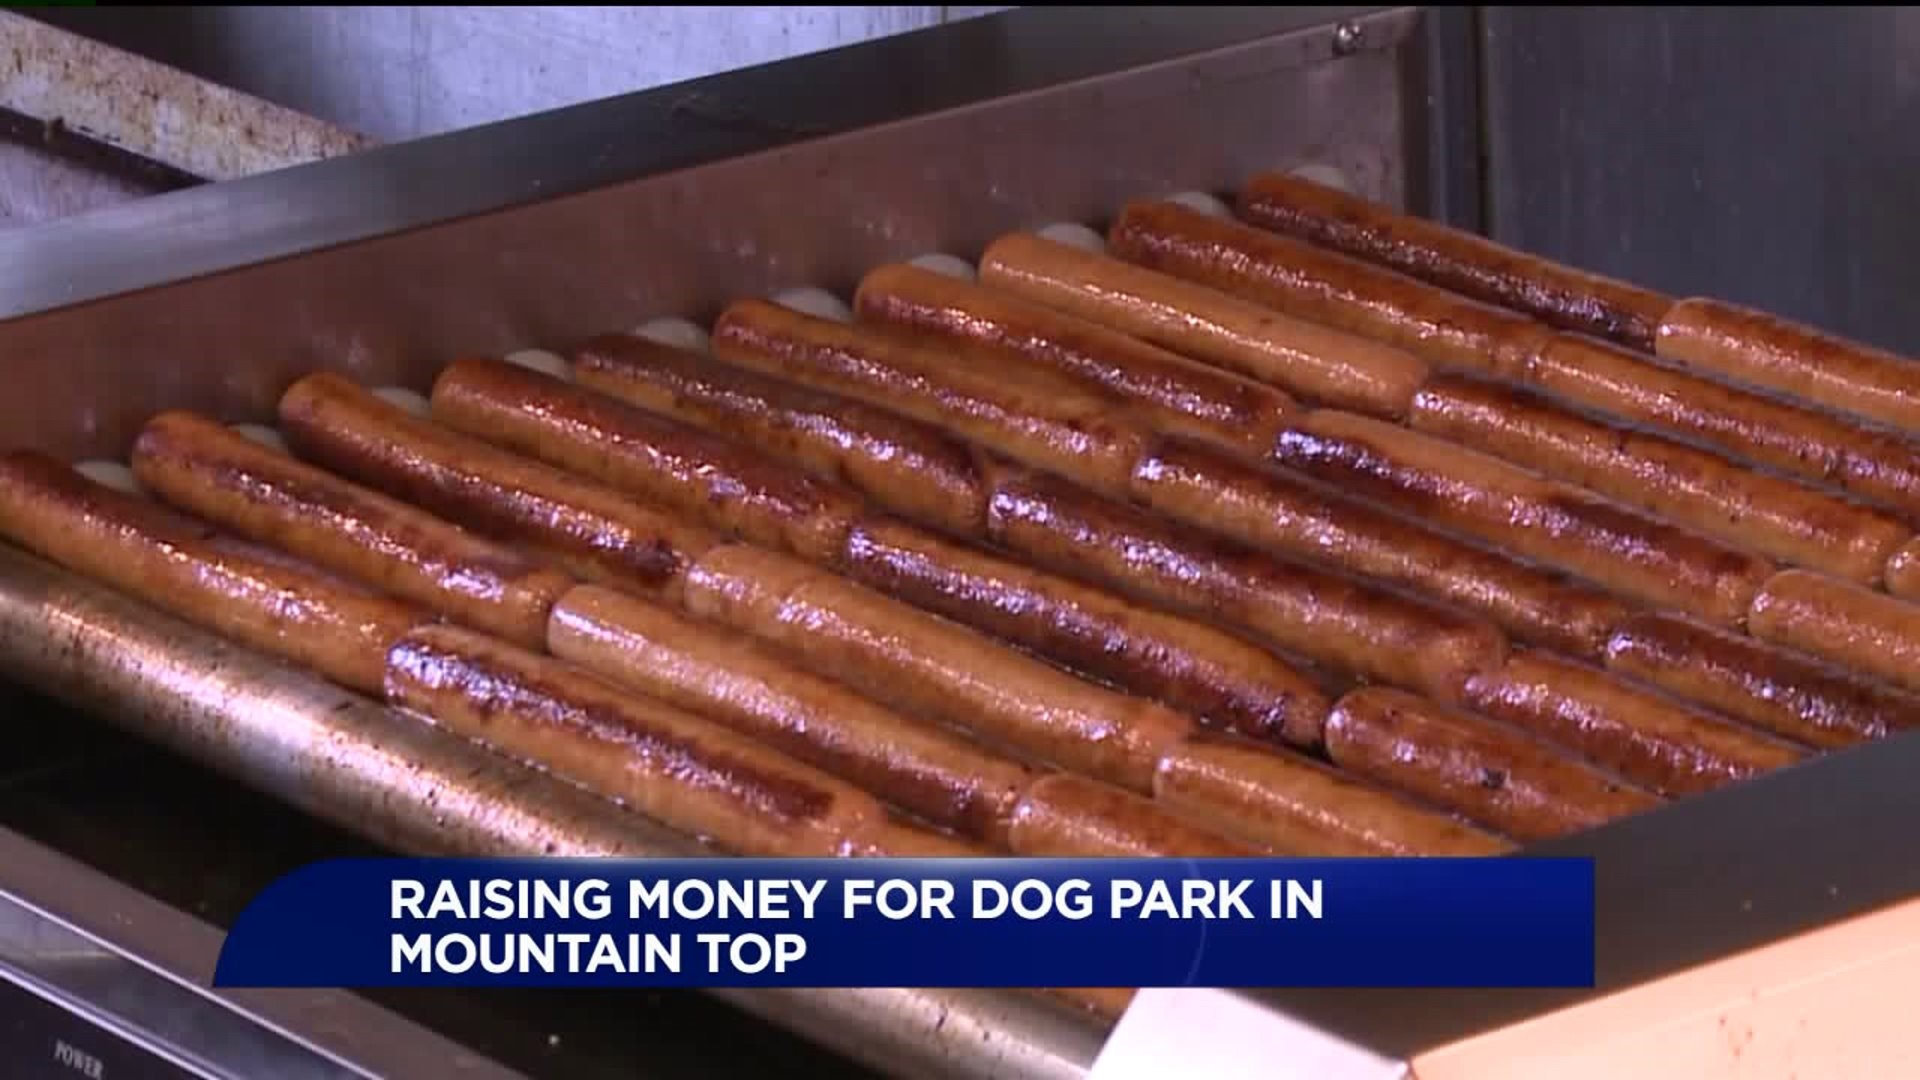 Eating Up Hot Dogs to Raise Money for Dog Park